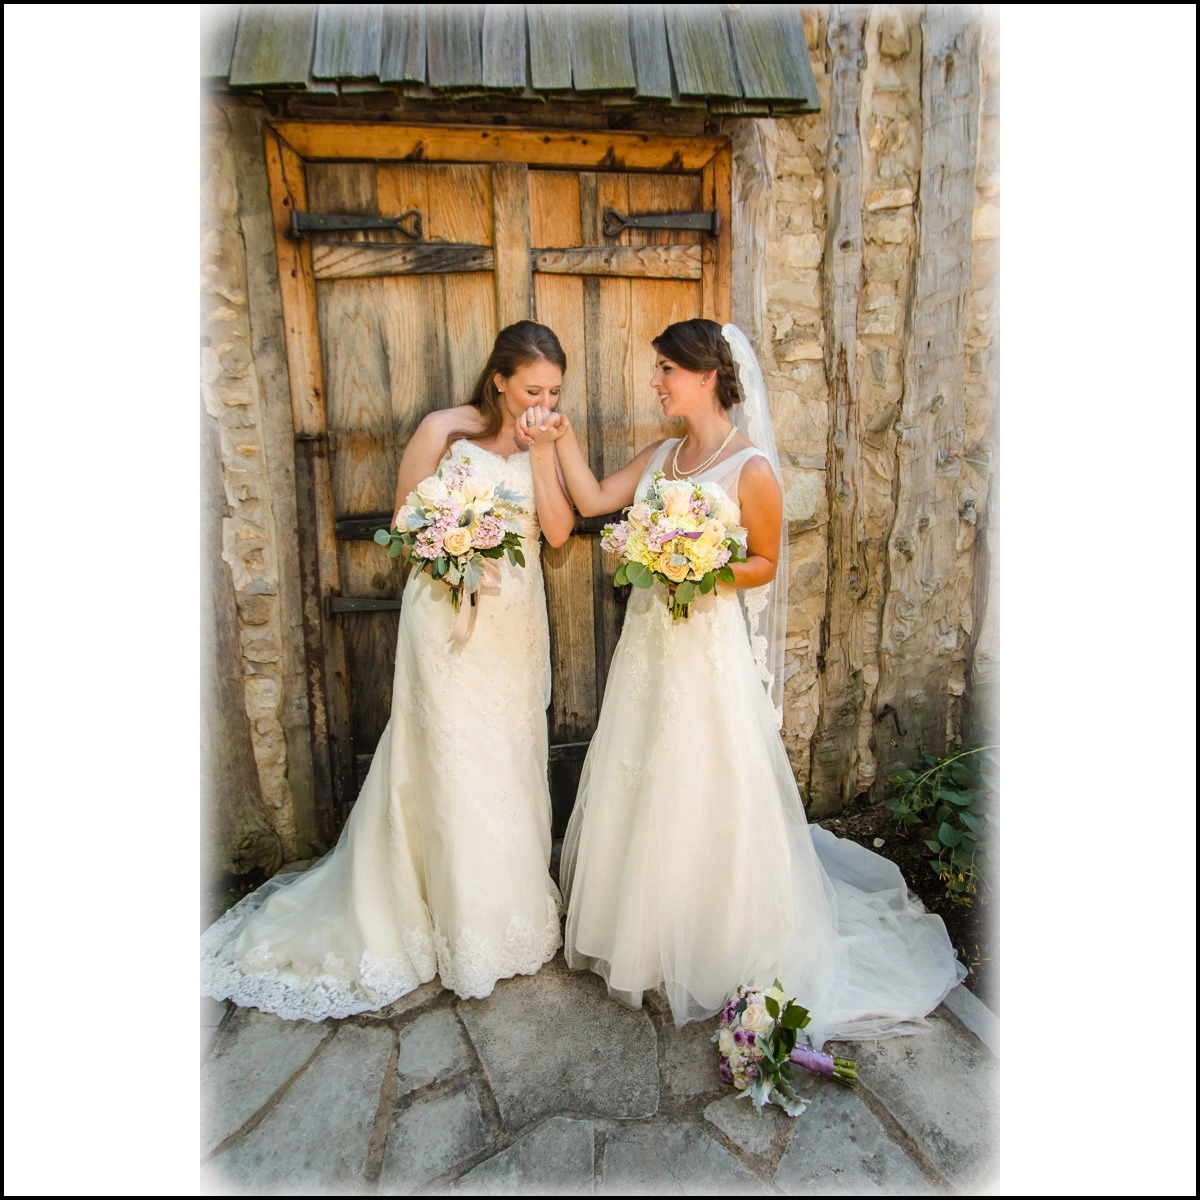 Link to Greater St Louis area wedding photographers gallery: Nicole and Shaina